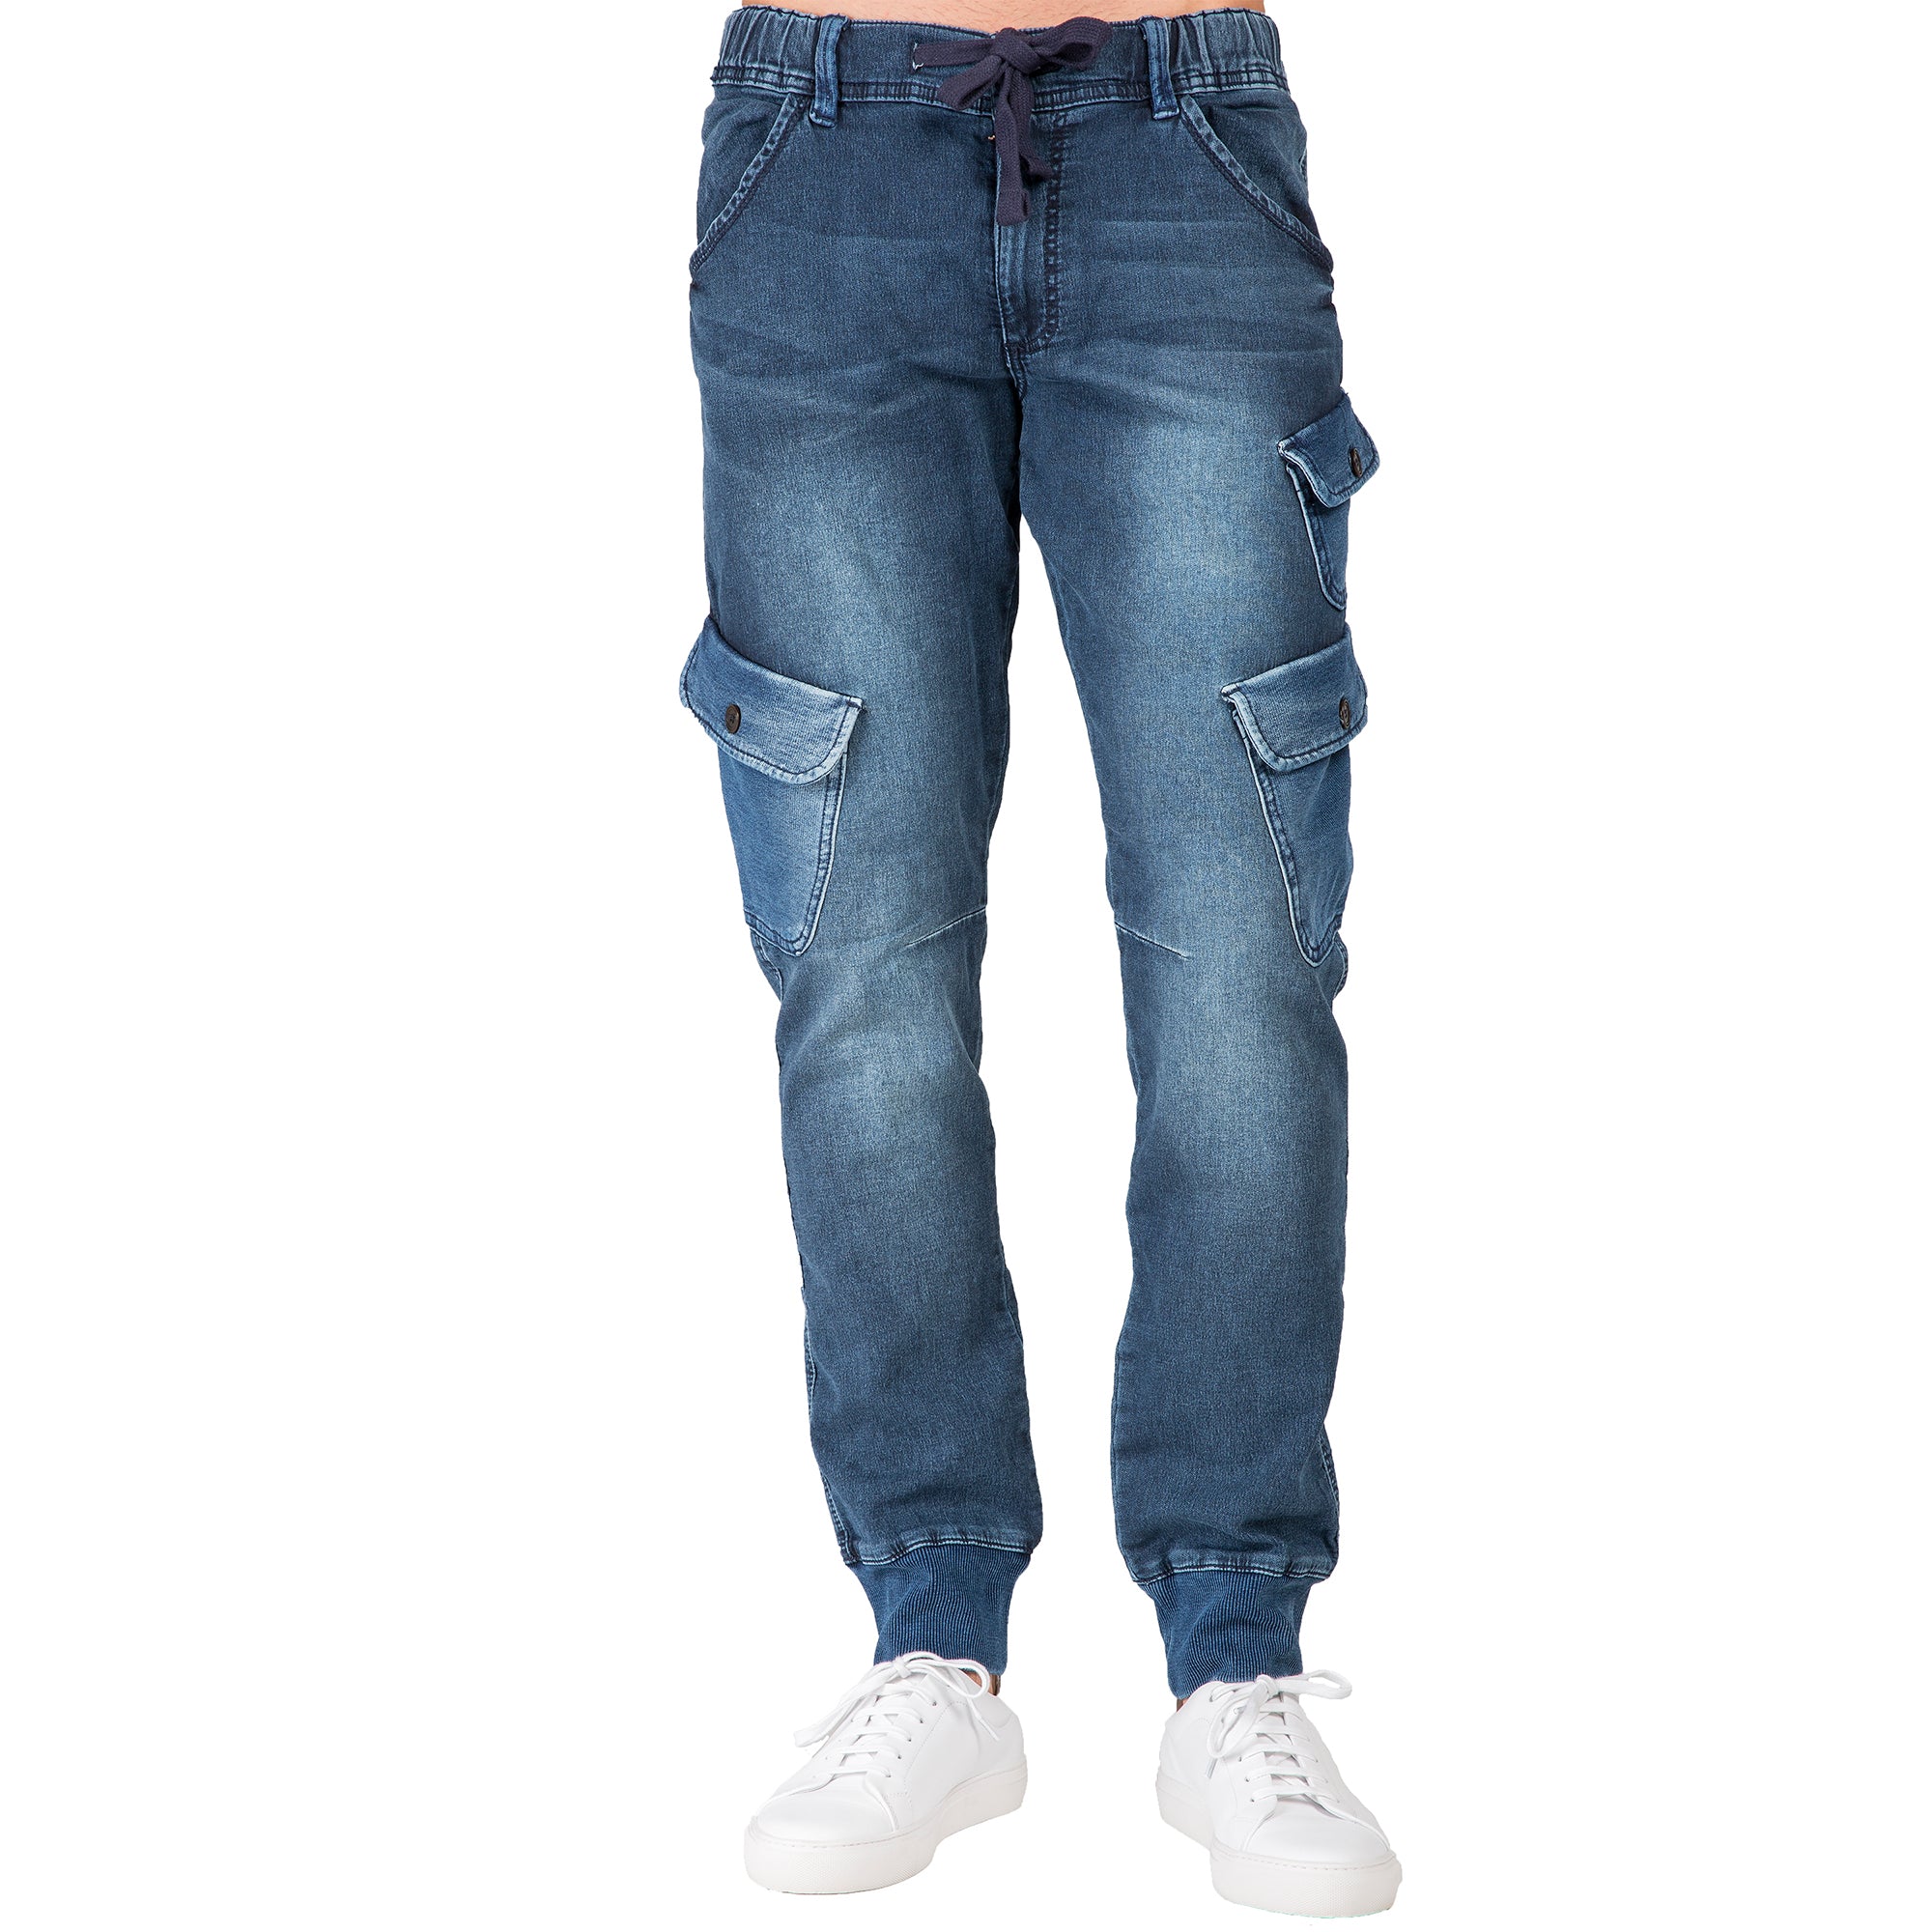 10 Stylish Collection of Jogger Jeans for Men and Women